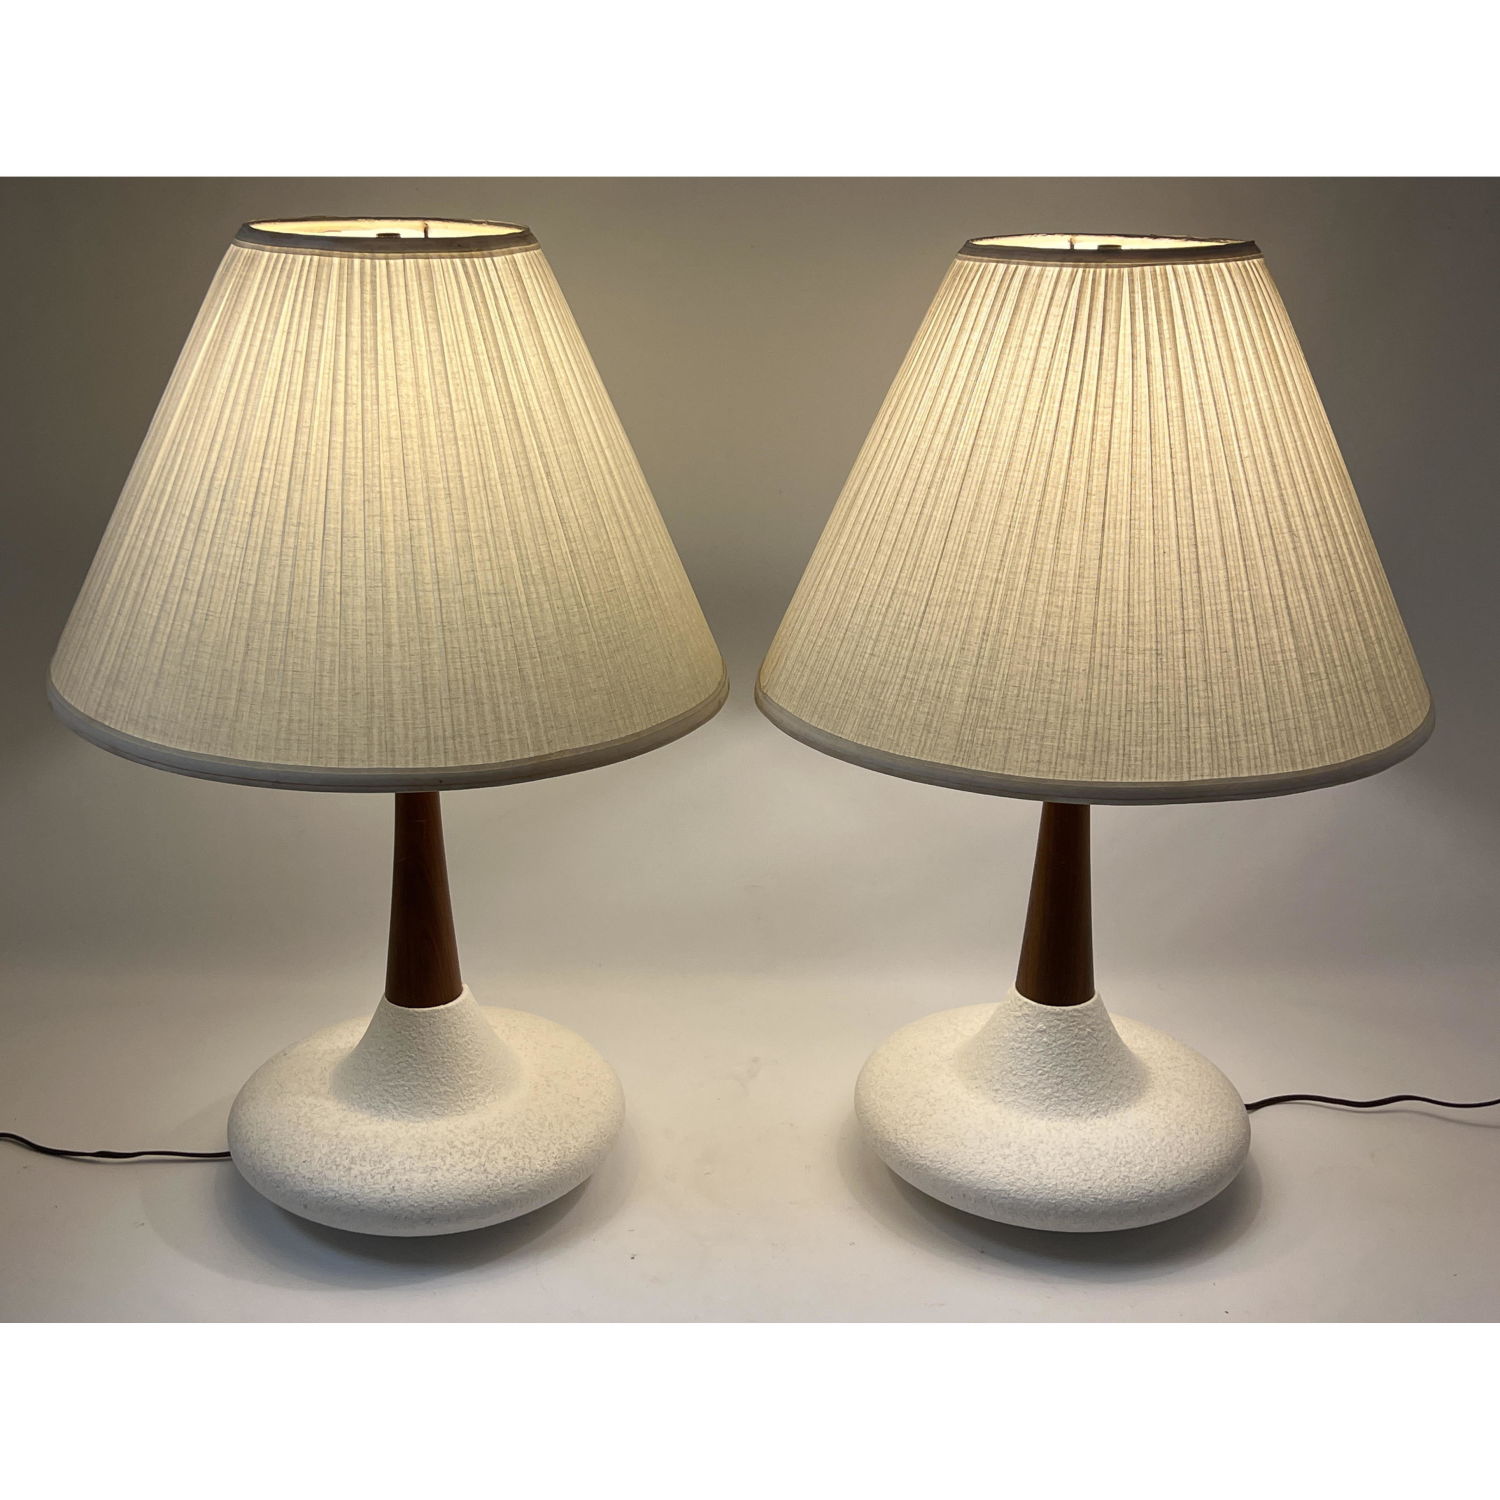 Pair 50s Modern Table Lamps. White